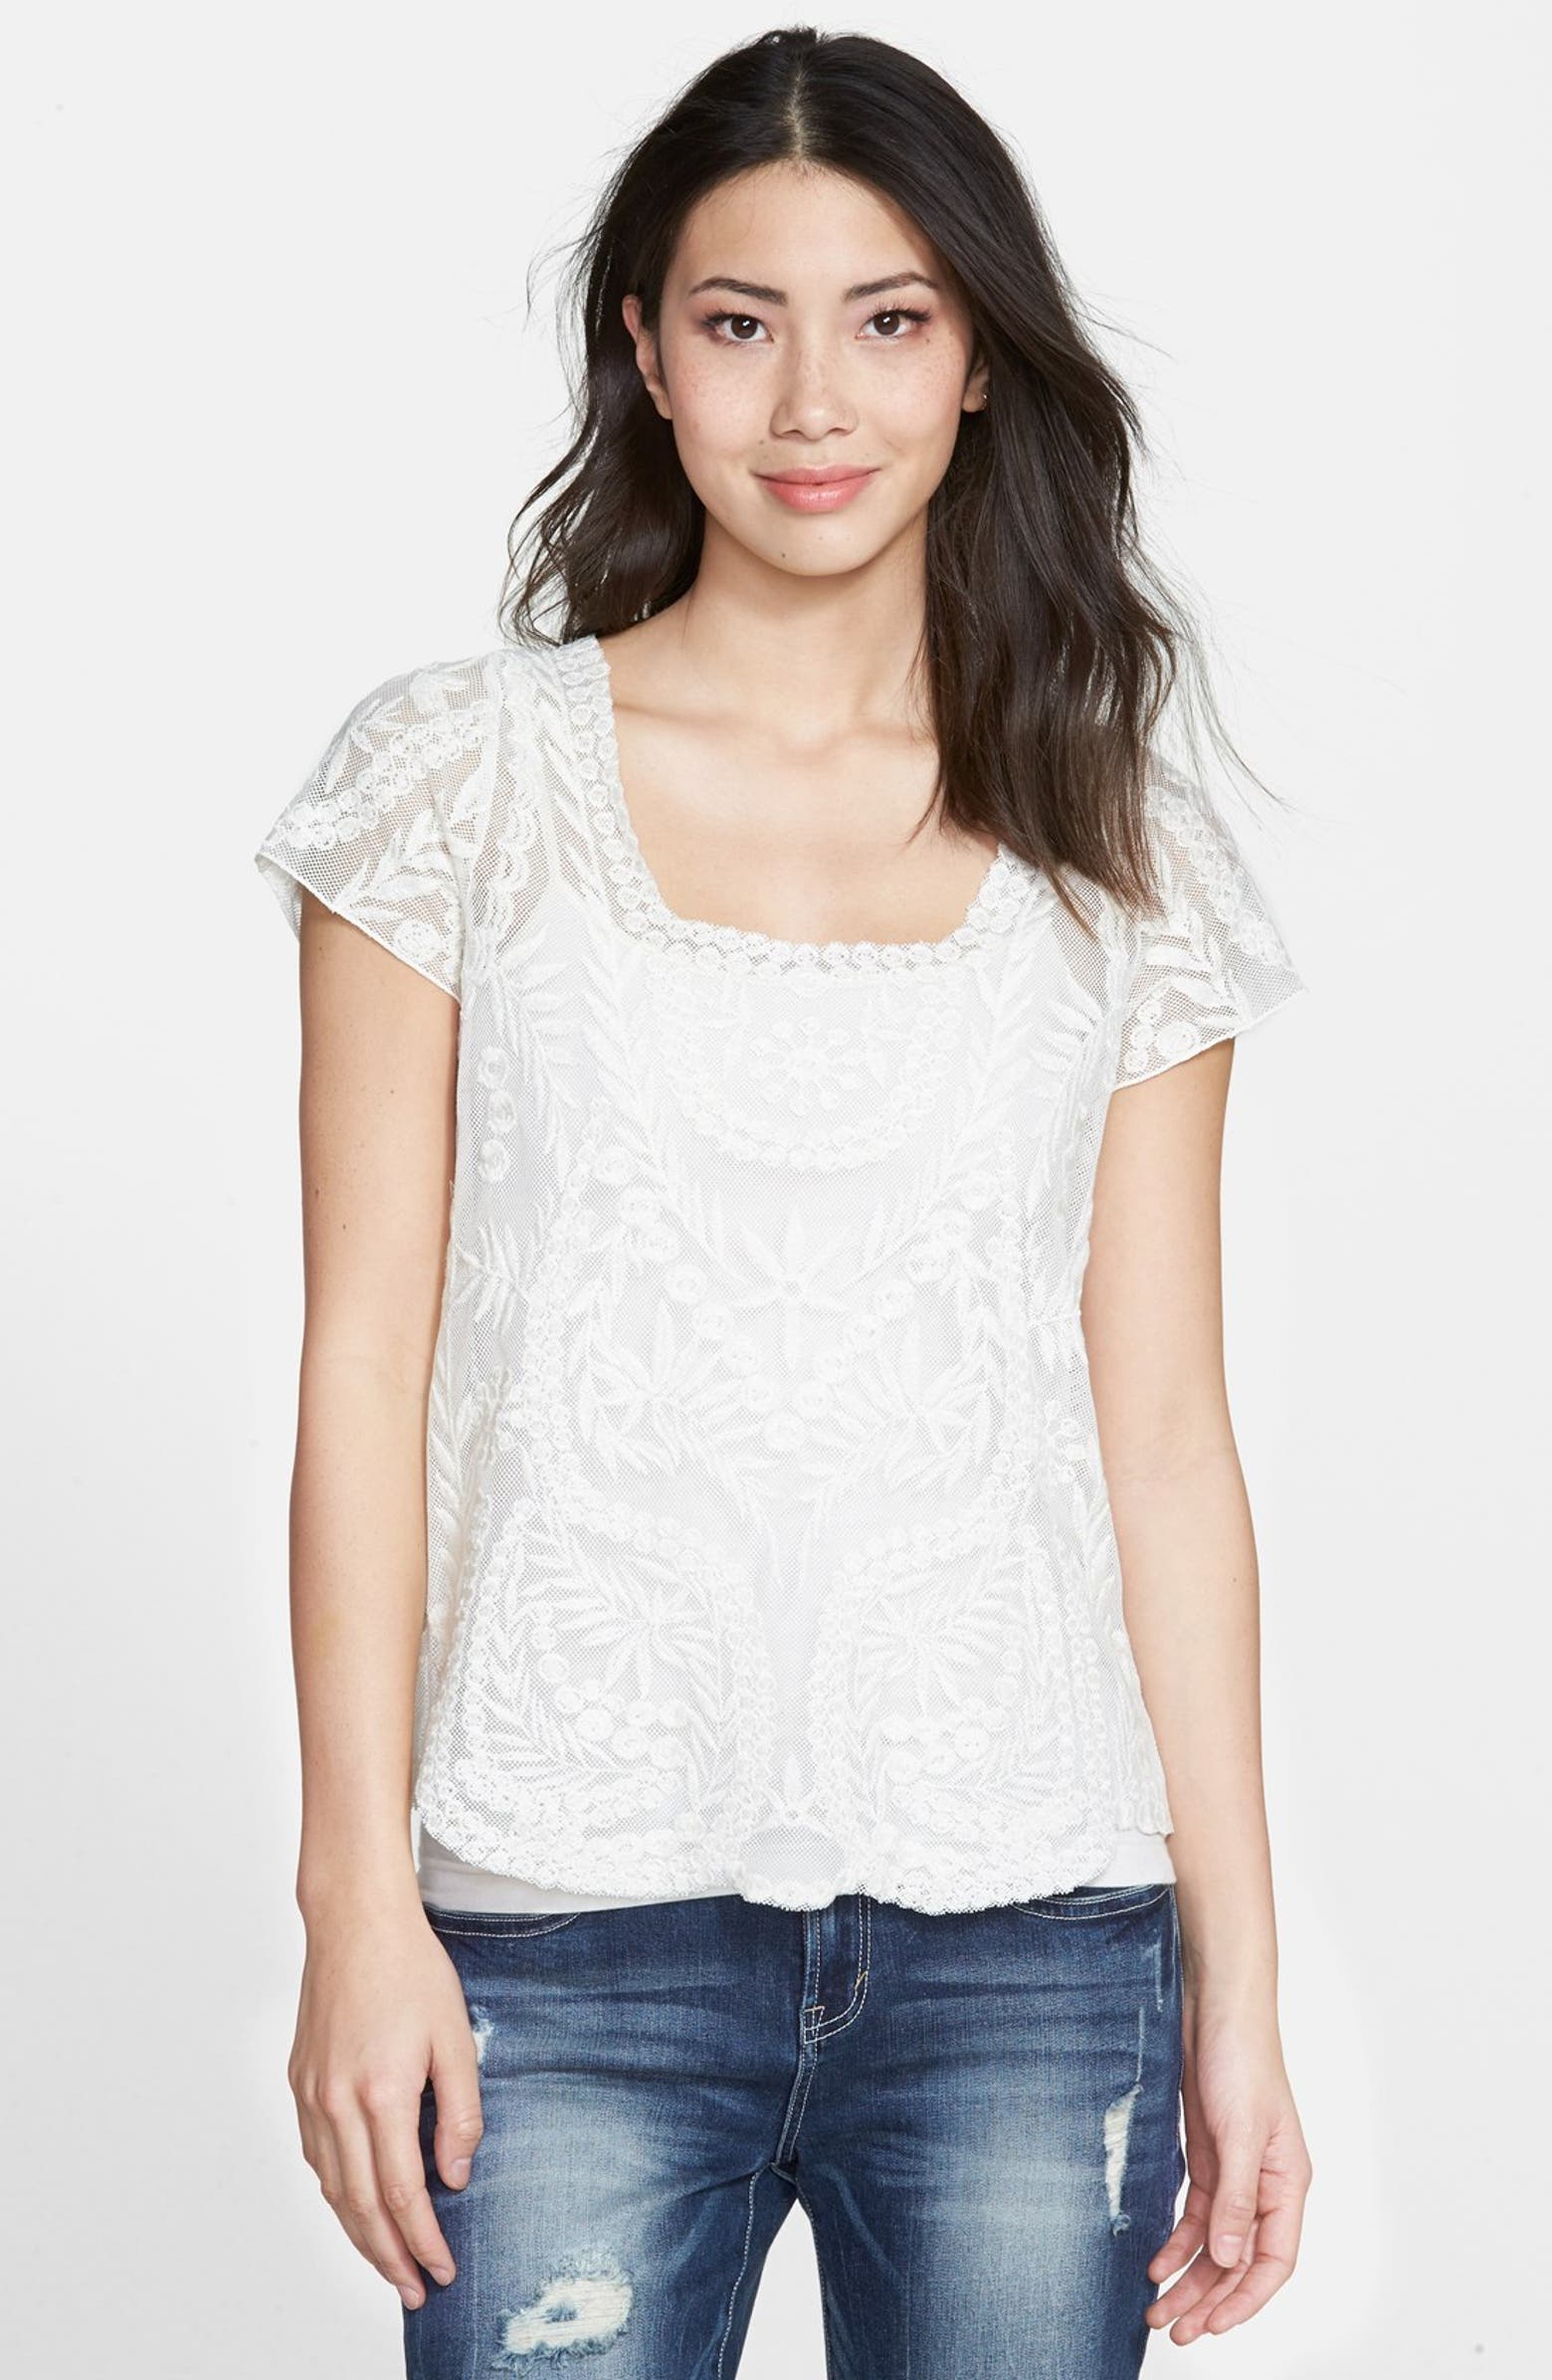 Jessica Simpson 'Kinley' Embroidered Lace Tee | Nordstrom